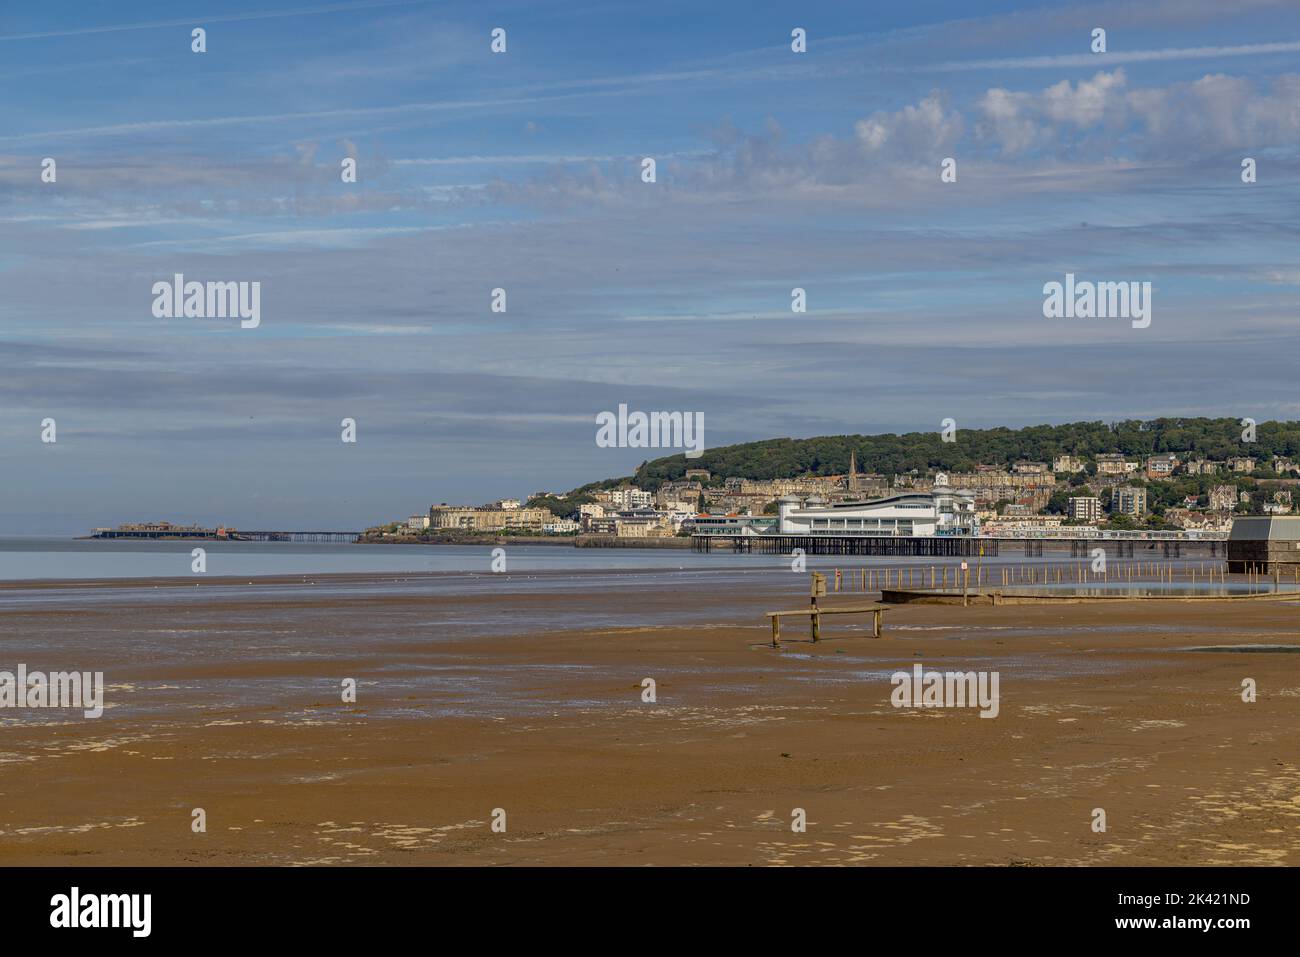 Grand Pier and Birnbeck pier at low tide Stock Photo